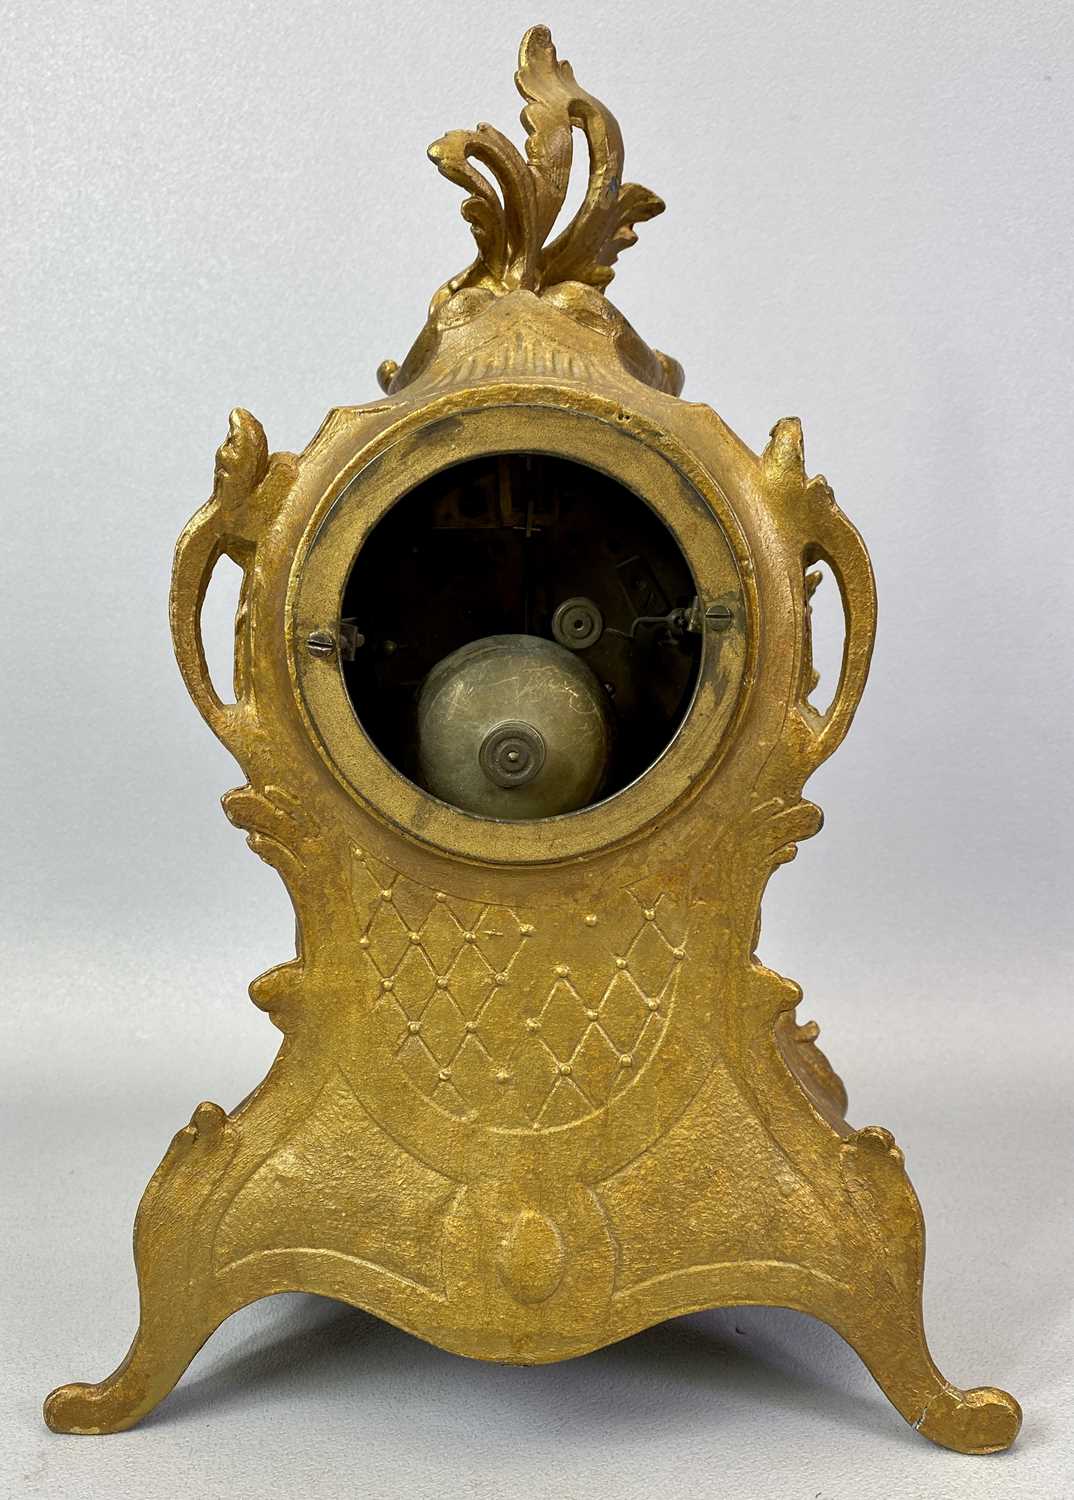 A FRENCH ROCOCO STYLE GILT PAINTED MANTEL CLOCK - late 19th century, circular porcelain dial hand - Image 3 of 5